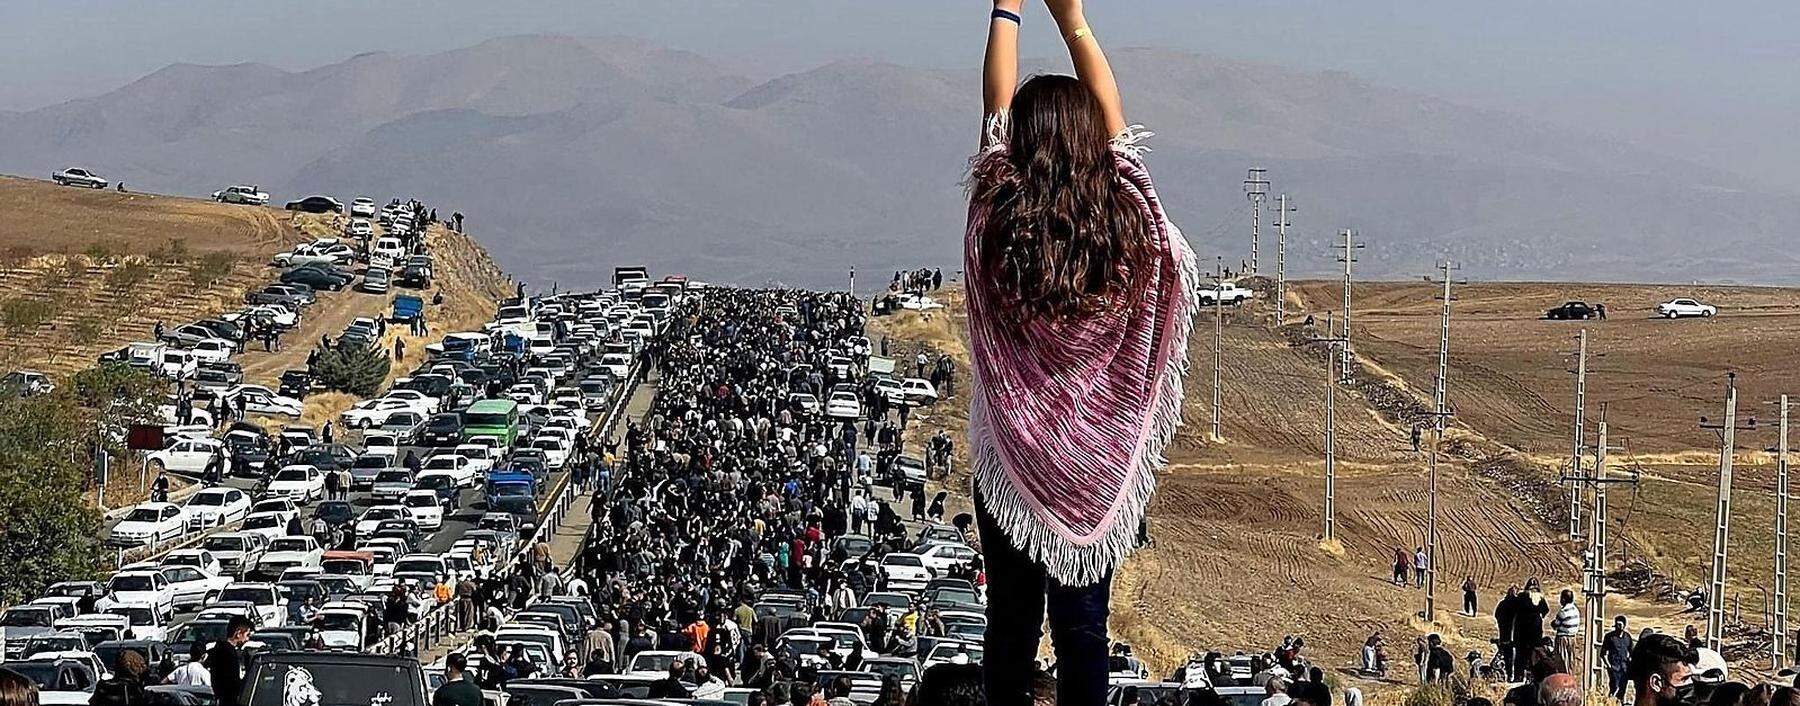 IRAN-POLITICS-WOMEN-PROTEST-AFP PICTURES OF THE YEAR 2022